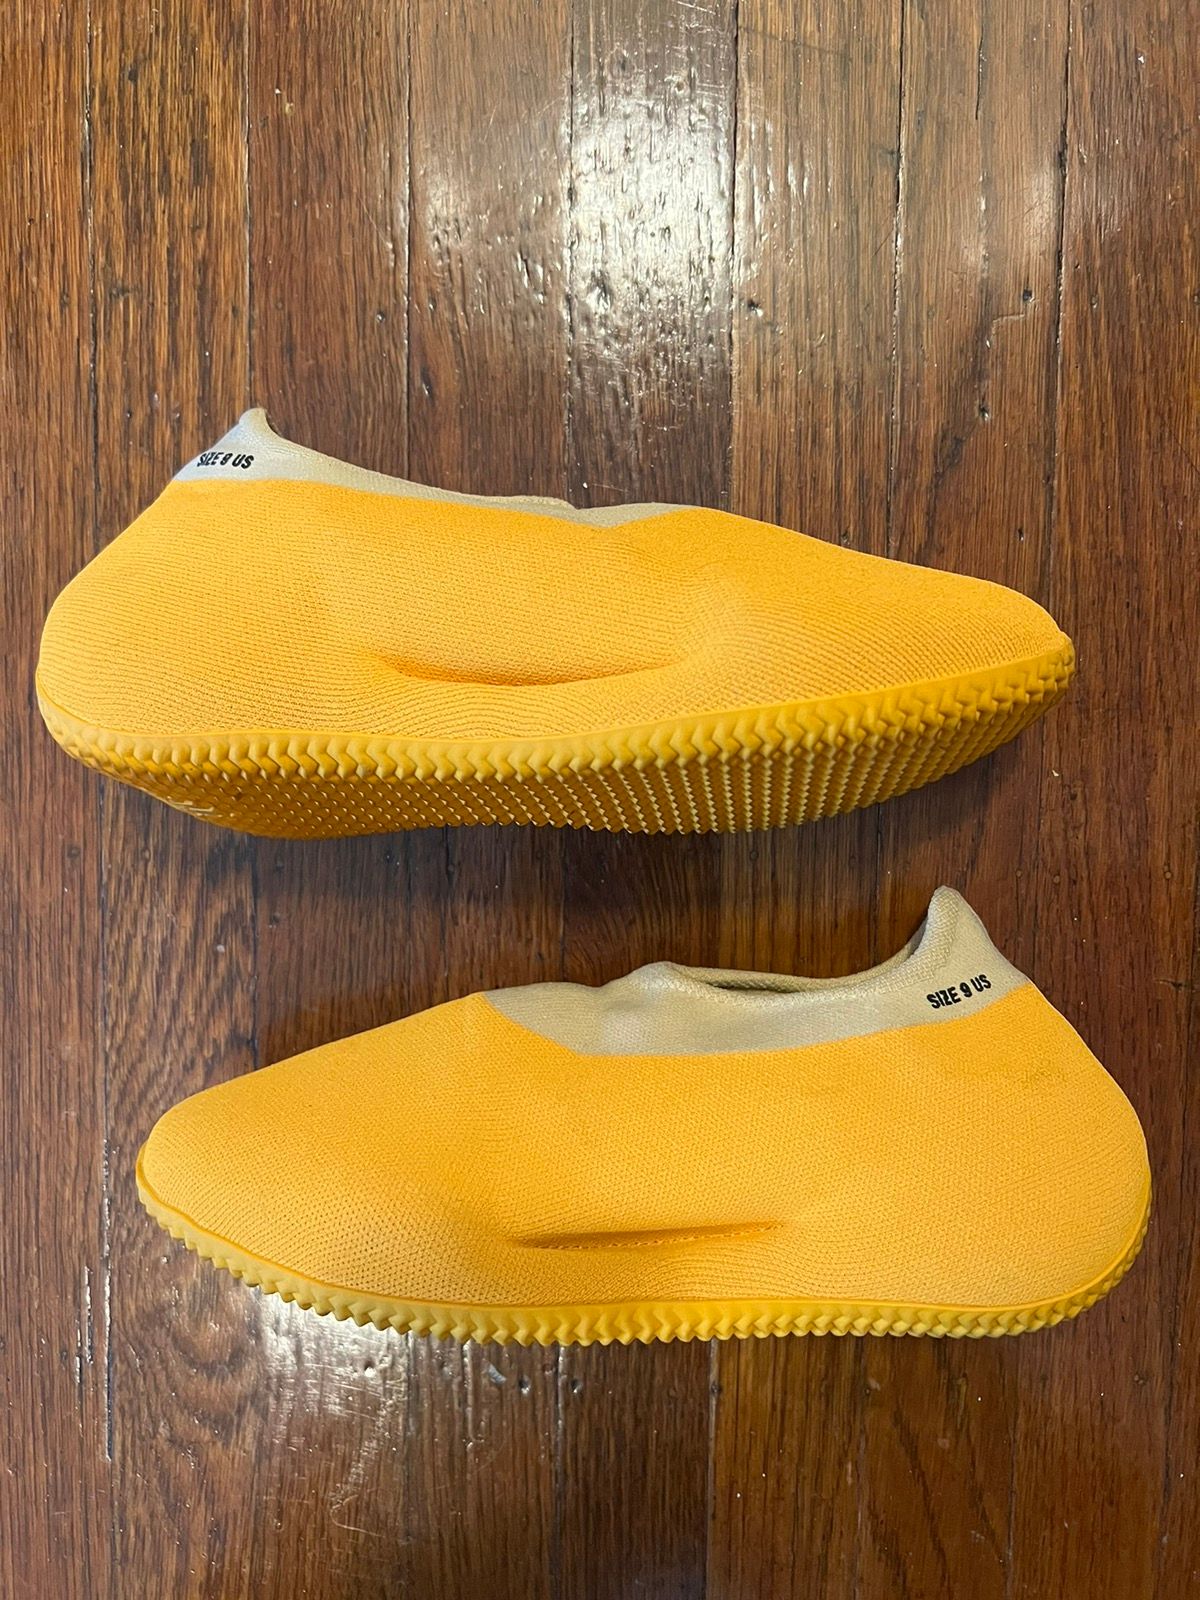 Pre-owned Adidas X Kanye West Yeezy Knit Runner ‘sulfur' Shoes In Yellow